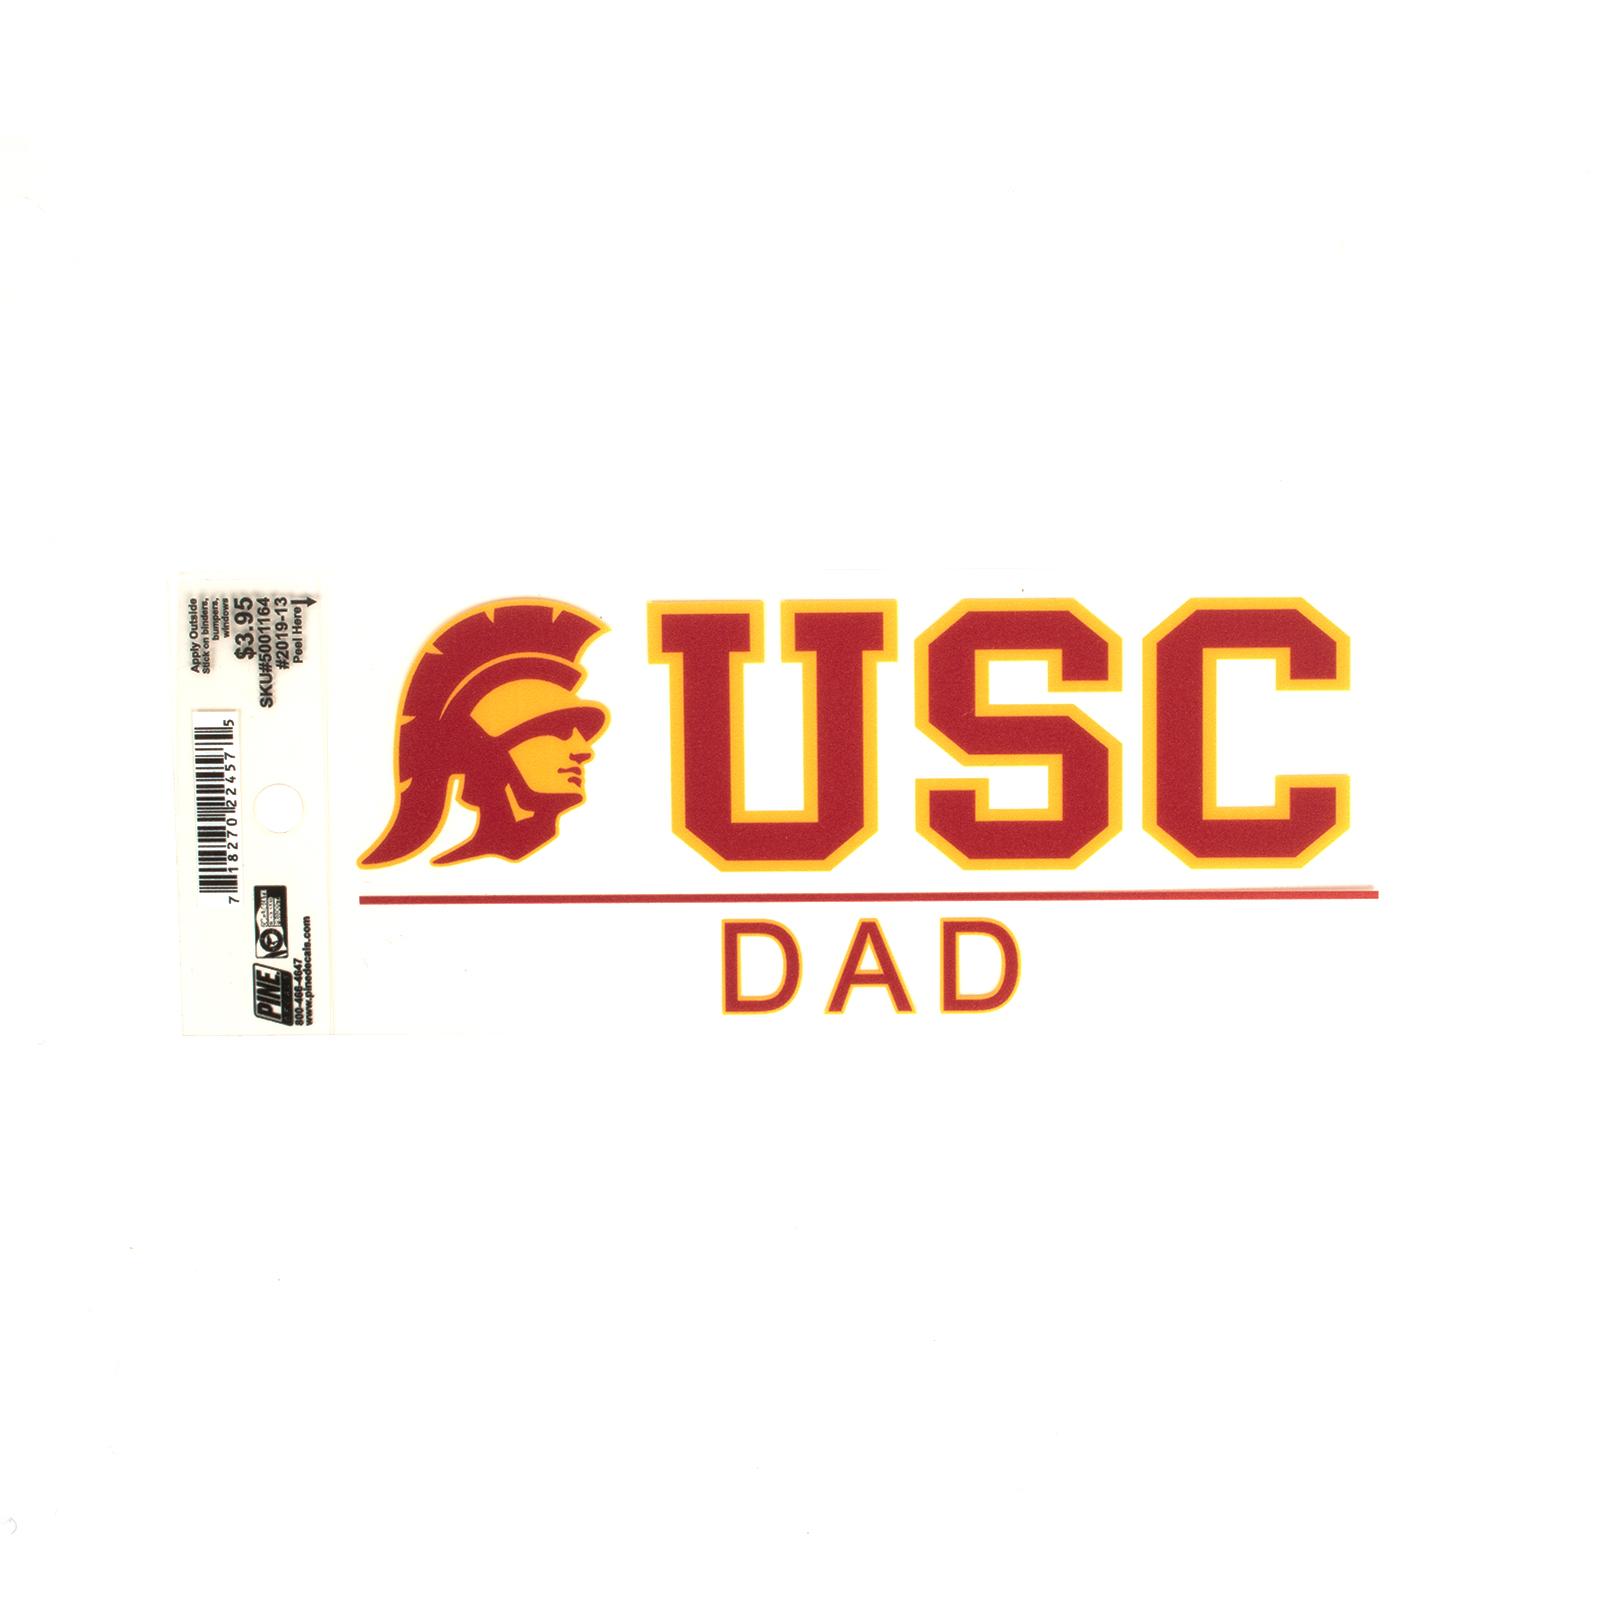 USC Tommy Dad Inside Decal 3" X 8" image01